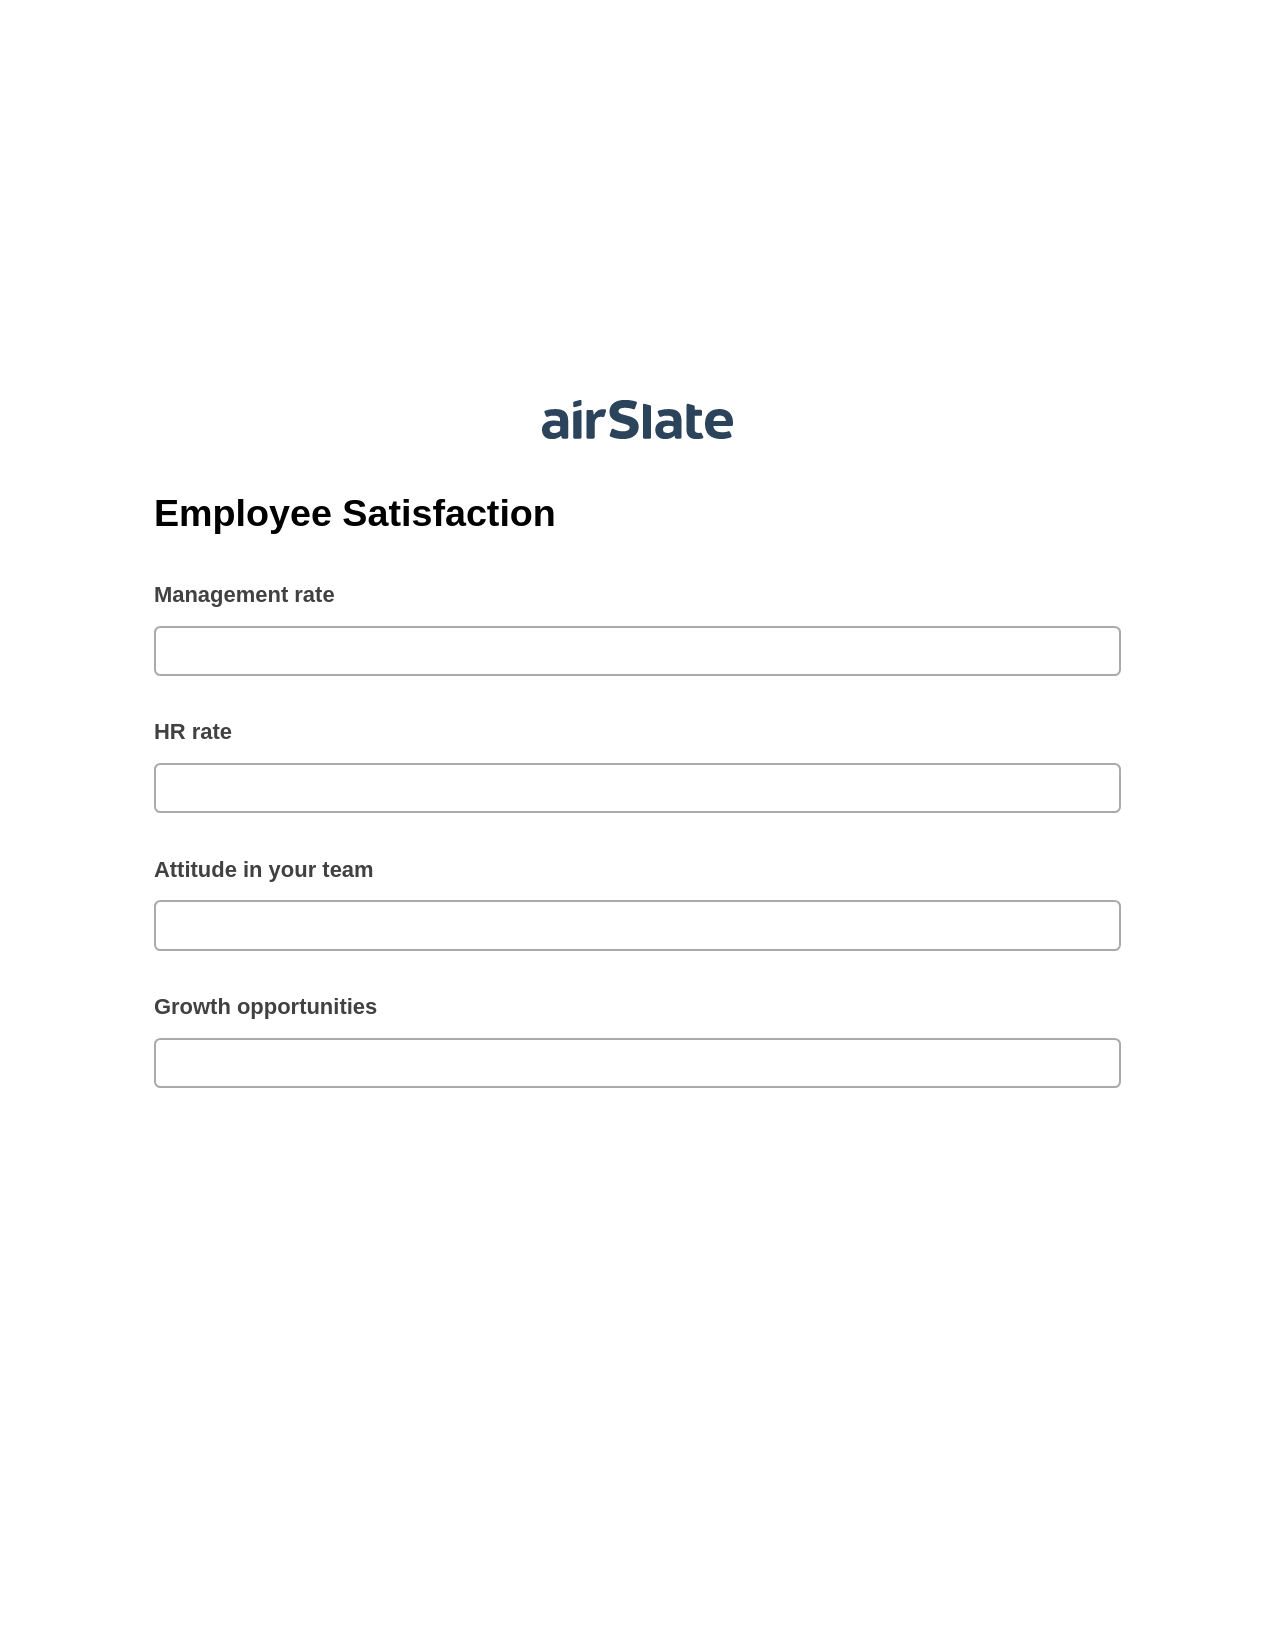 Employee Satisfaction Pre-fill from Excel Spreadsheet Bot, Text Message Notification Bot, Export to Formstack Documents Bot